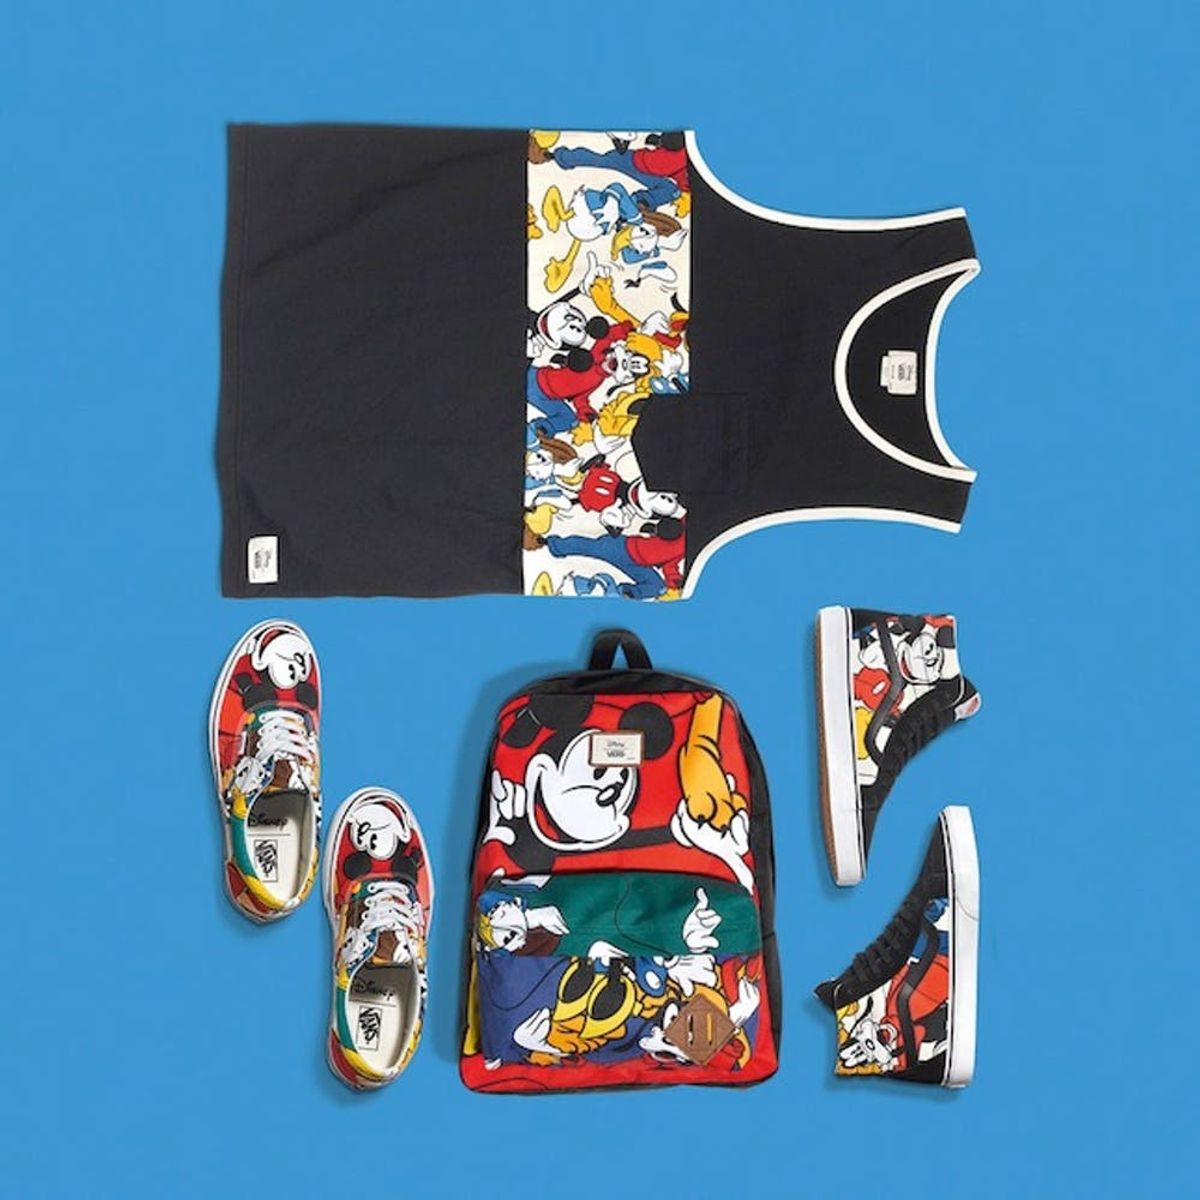 This Disney + Vans Collab Will Make You Feel like a Kid Again